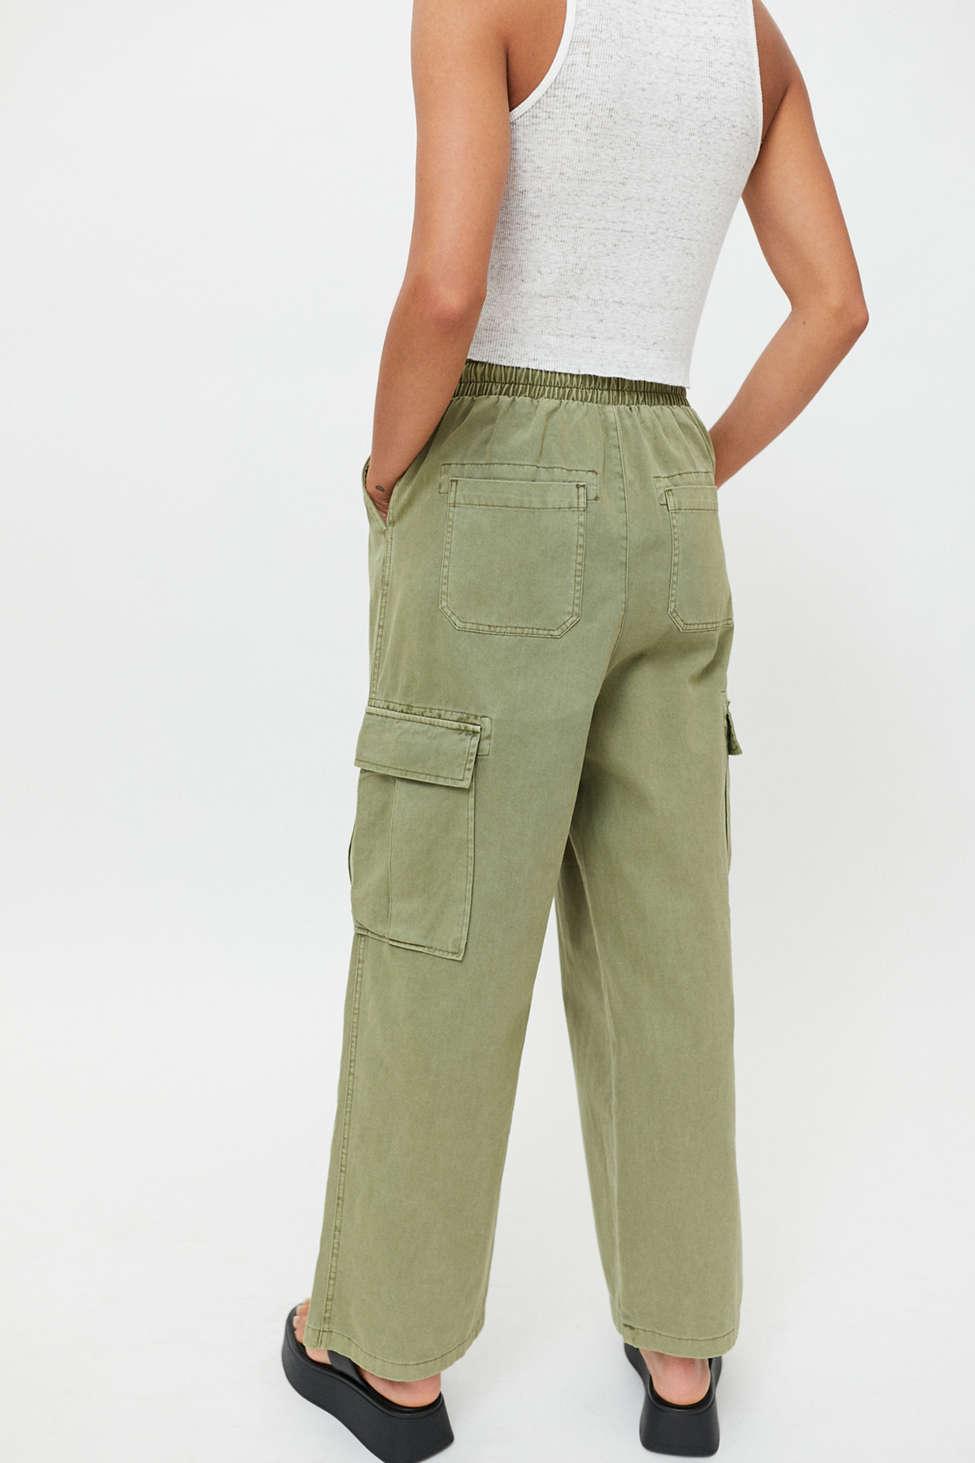 Urban Outfitters Uo Alexis Drawstring Skate Pant in Green | Lyst